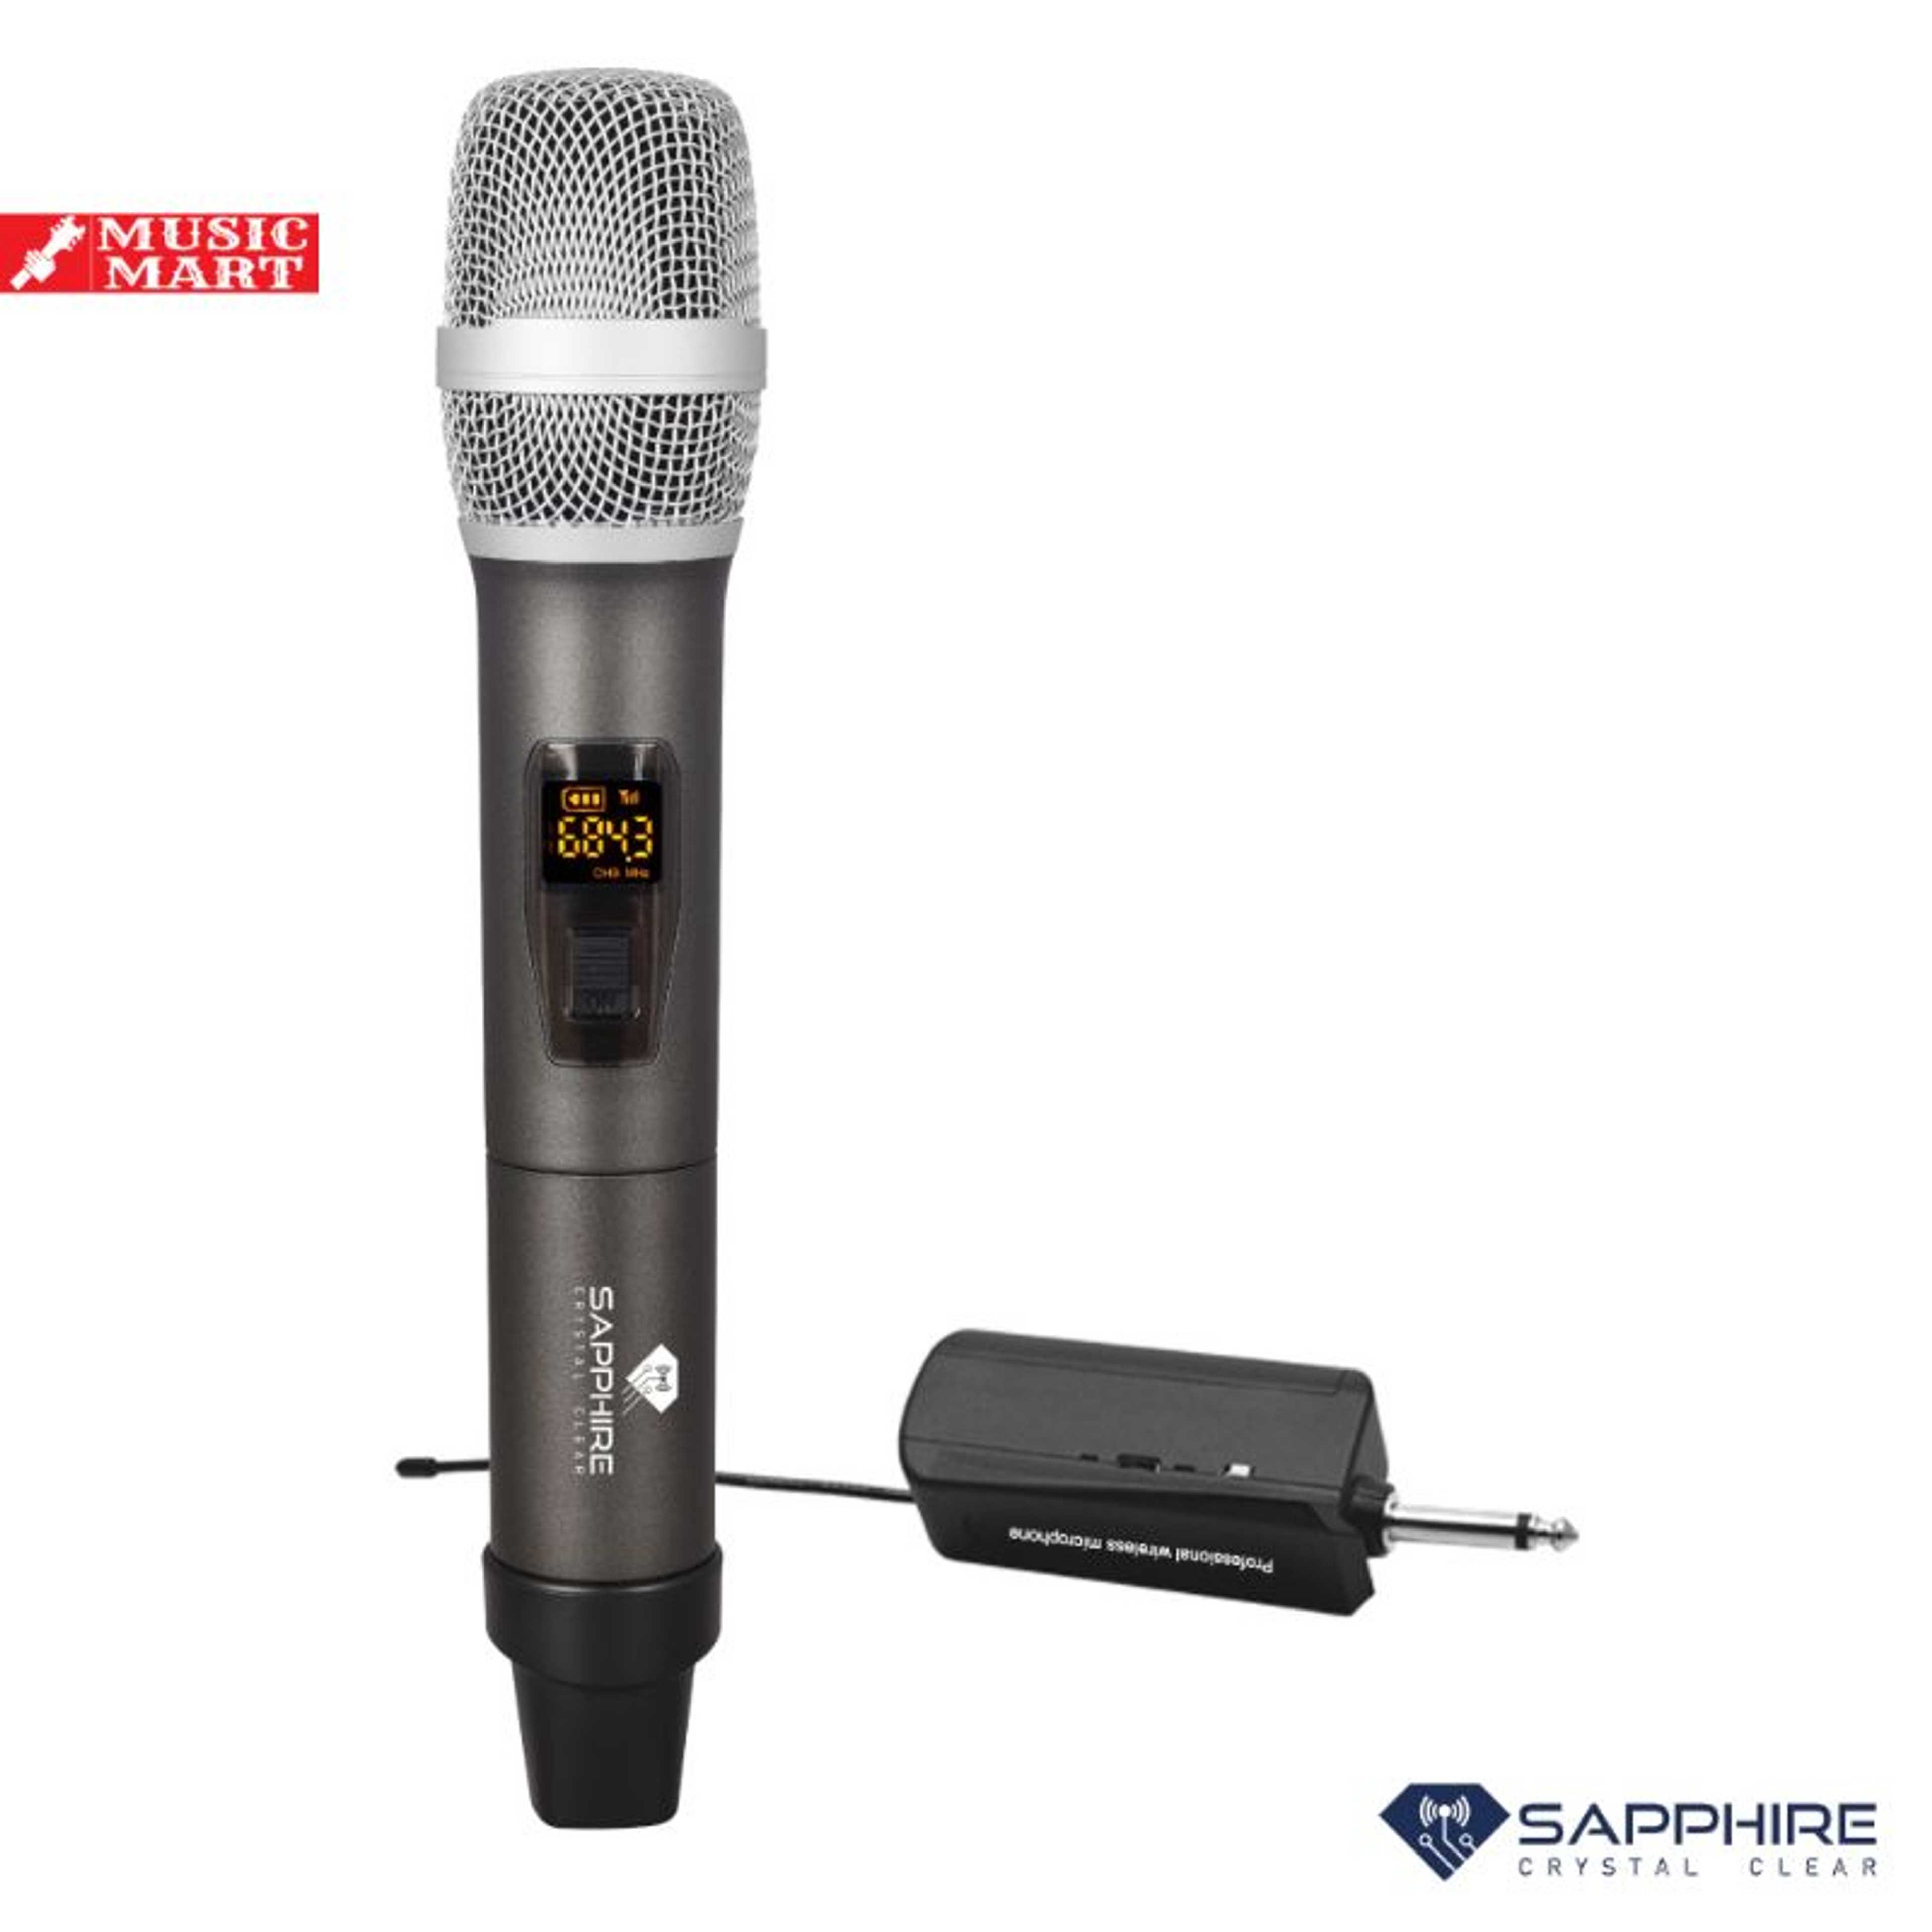 PREMIUM QUALITY DYNAMIC WIRELESS MICROPHONE - FREQUENCY UPTO 65ft - UniDirectional POLAR PATTERN - EXCELLENT REPRODUCT OF VOICE AND MUSIC - PROFESSIONAL QUALITY SOUND PRODUCTION - CRYSTAL CLEAR SOUND